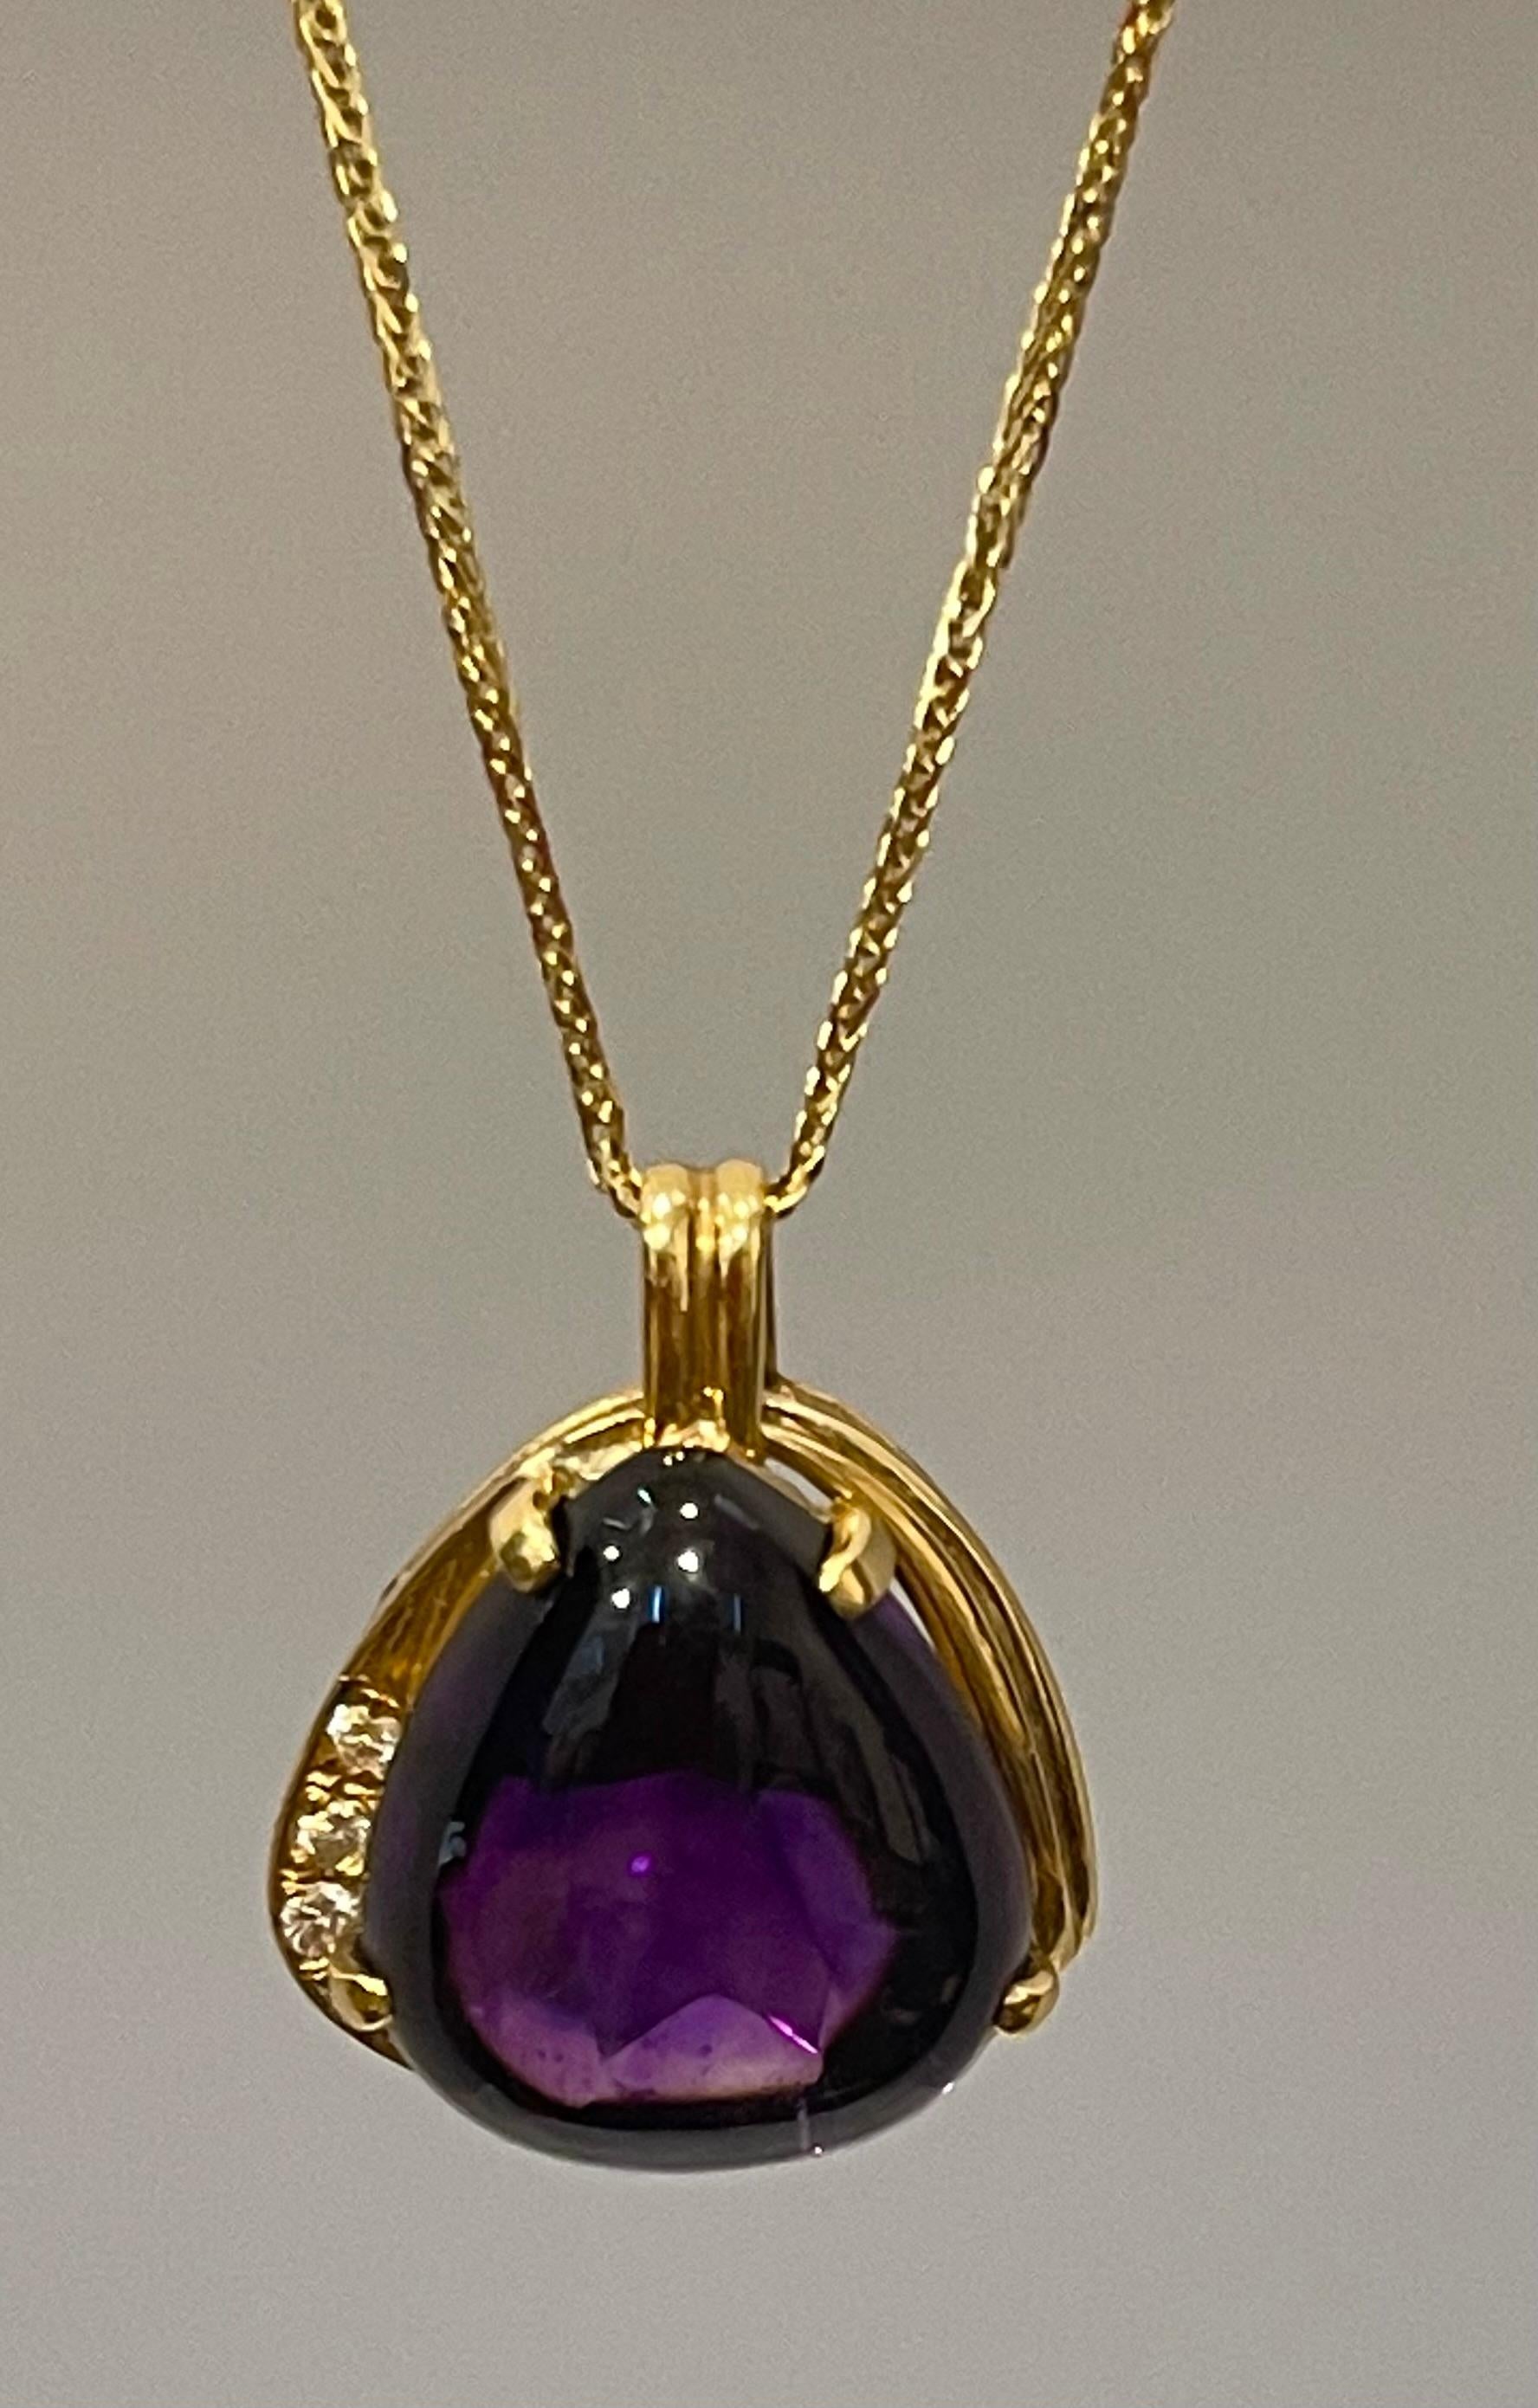 10 Carat Tear Drop Amethyst and Diamonds Pendent Necklace 18 Karat Yellow Gold For Sale 12